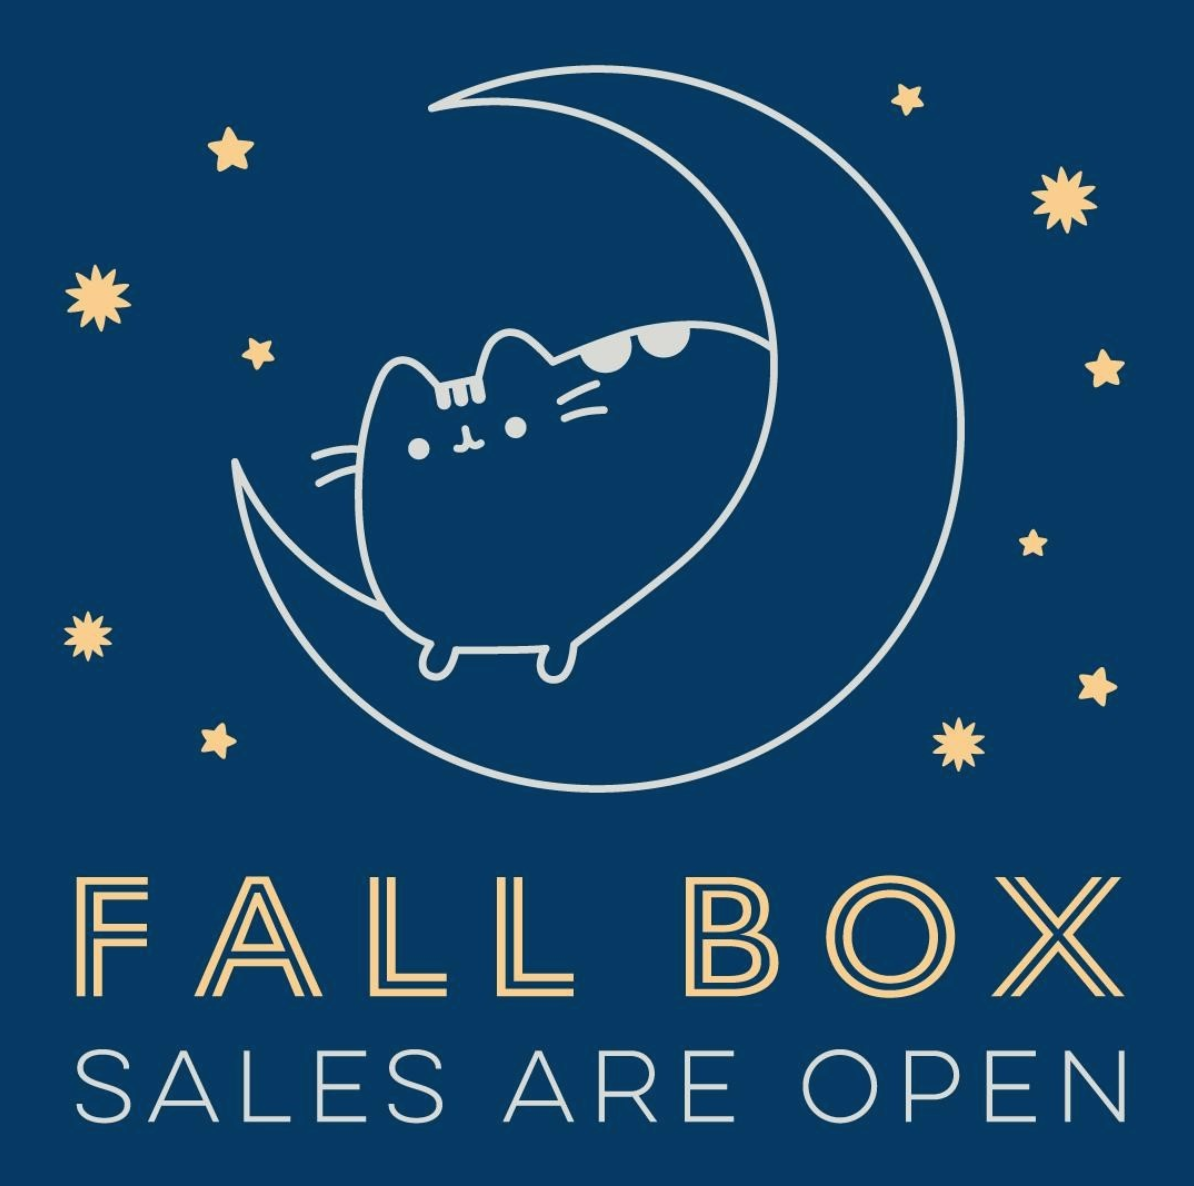 Pusheen Box Subscriptions Are Open! Fall 2020 Box Time!